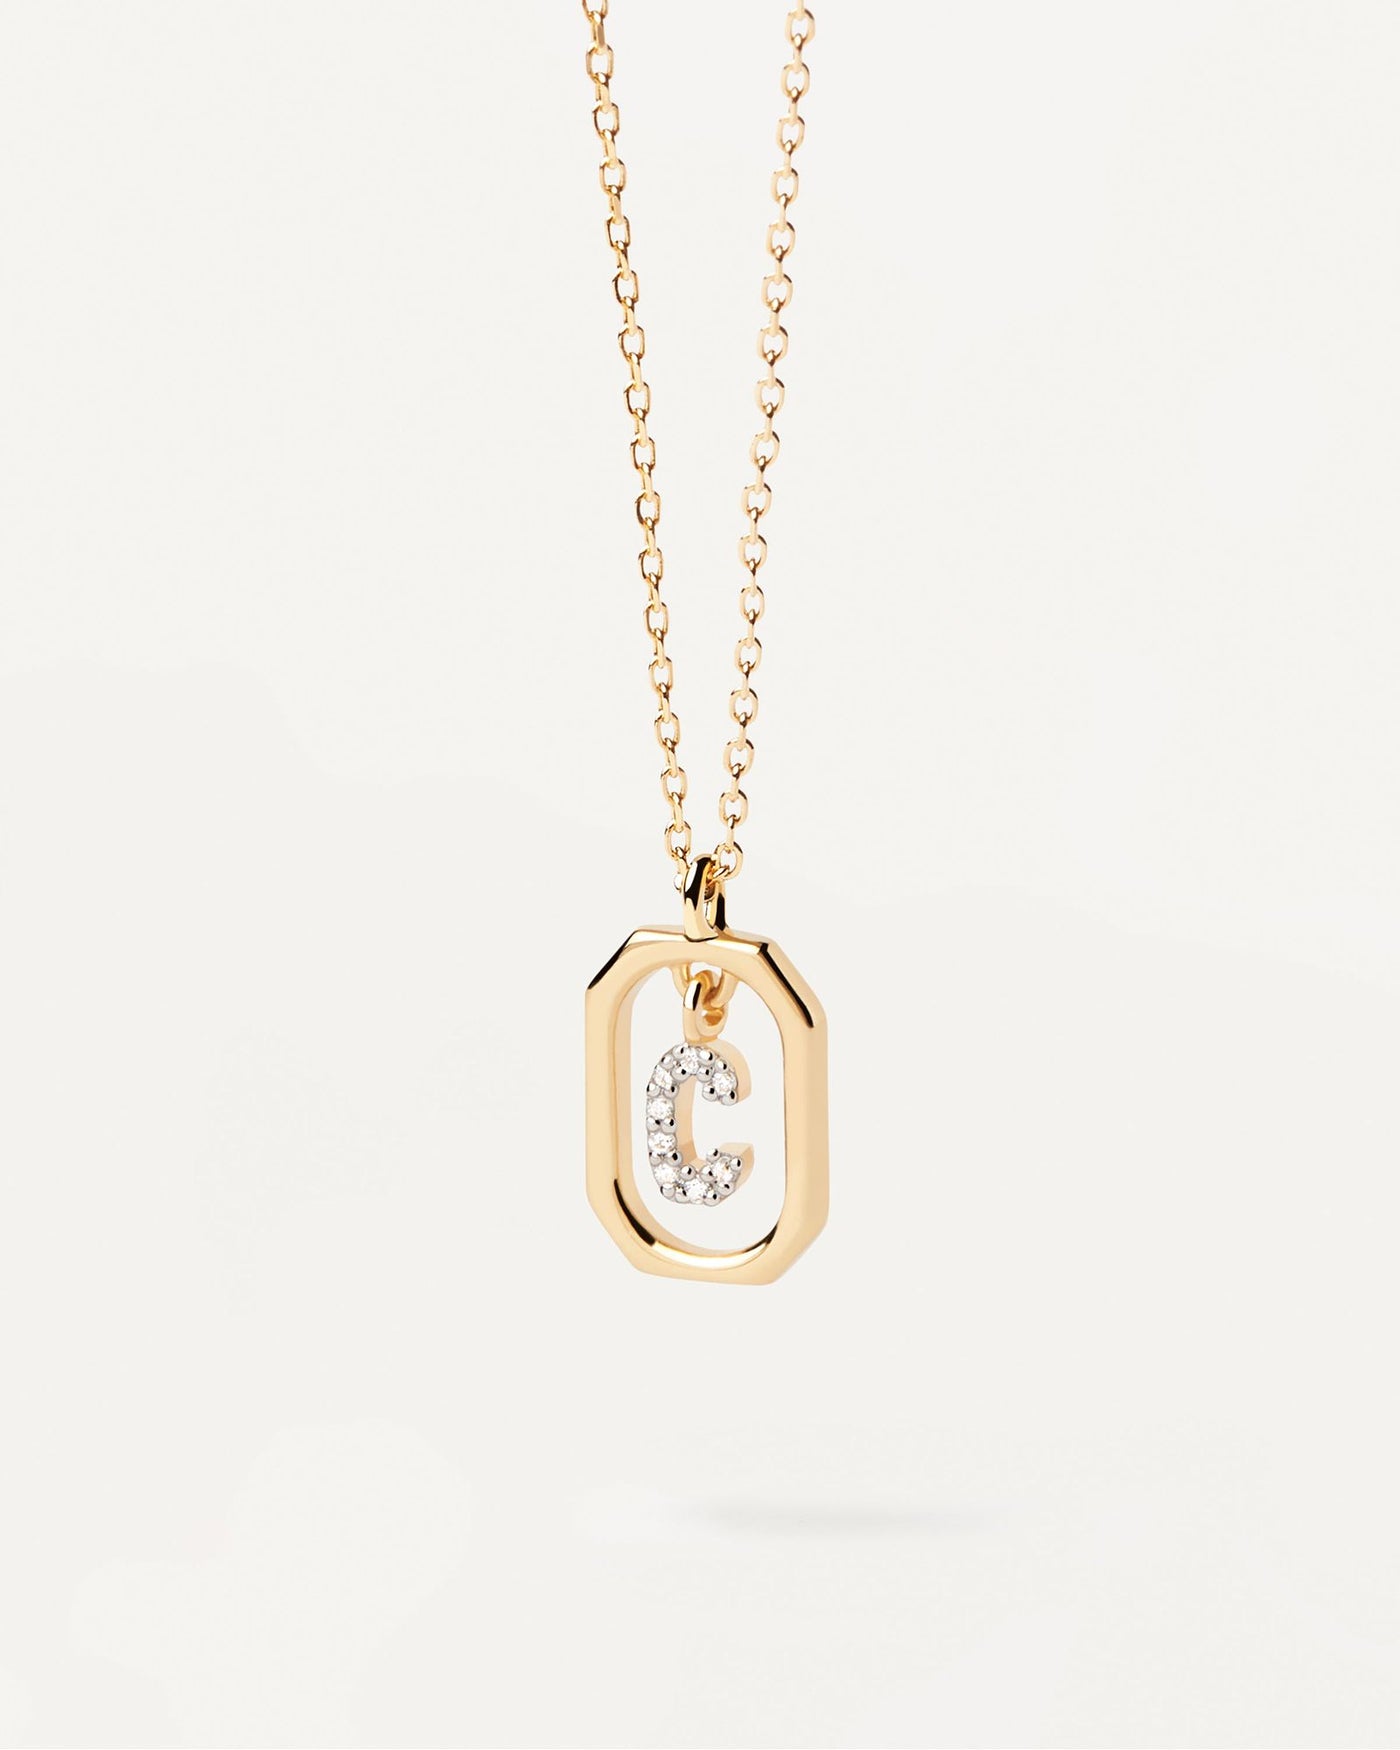 2024 Selection | Mini Letter C Necklace. Small initial C necklace in zirconia inside gold-plated silver octagonal pendant. Get the latest arrival from PDPAOLA. Place your order safely and get this Best Seller. Free Shipping.